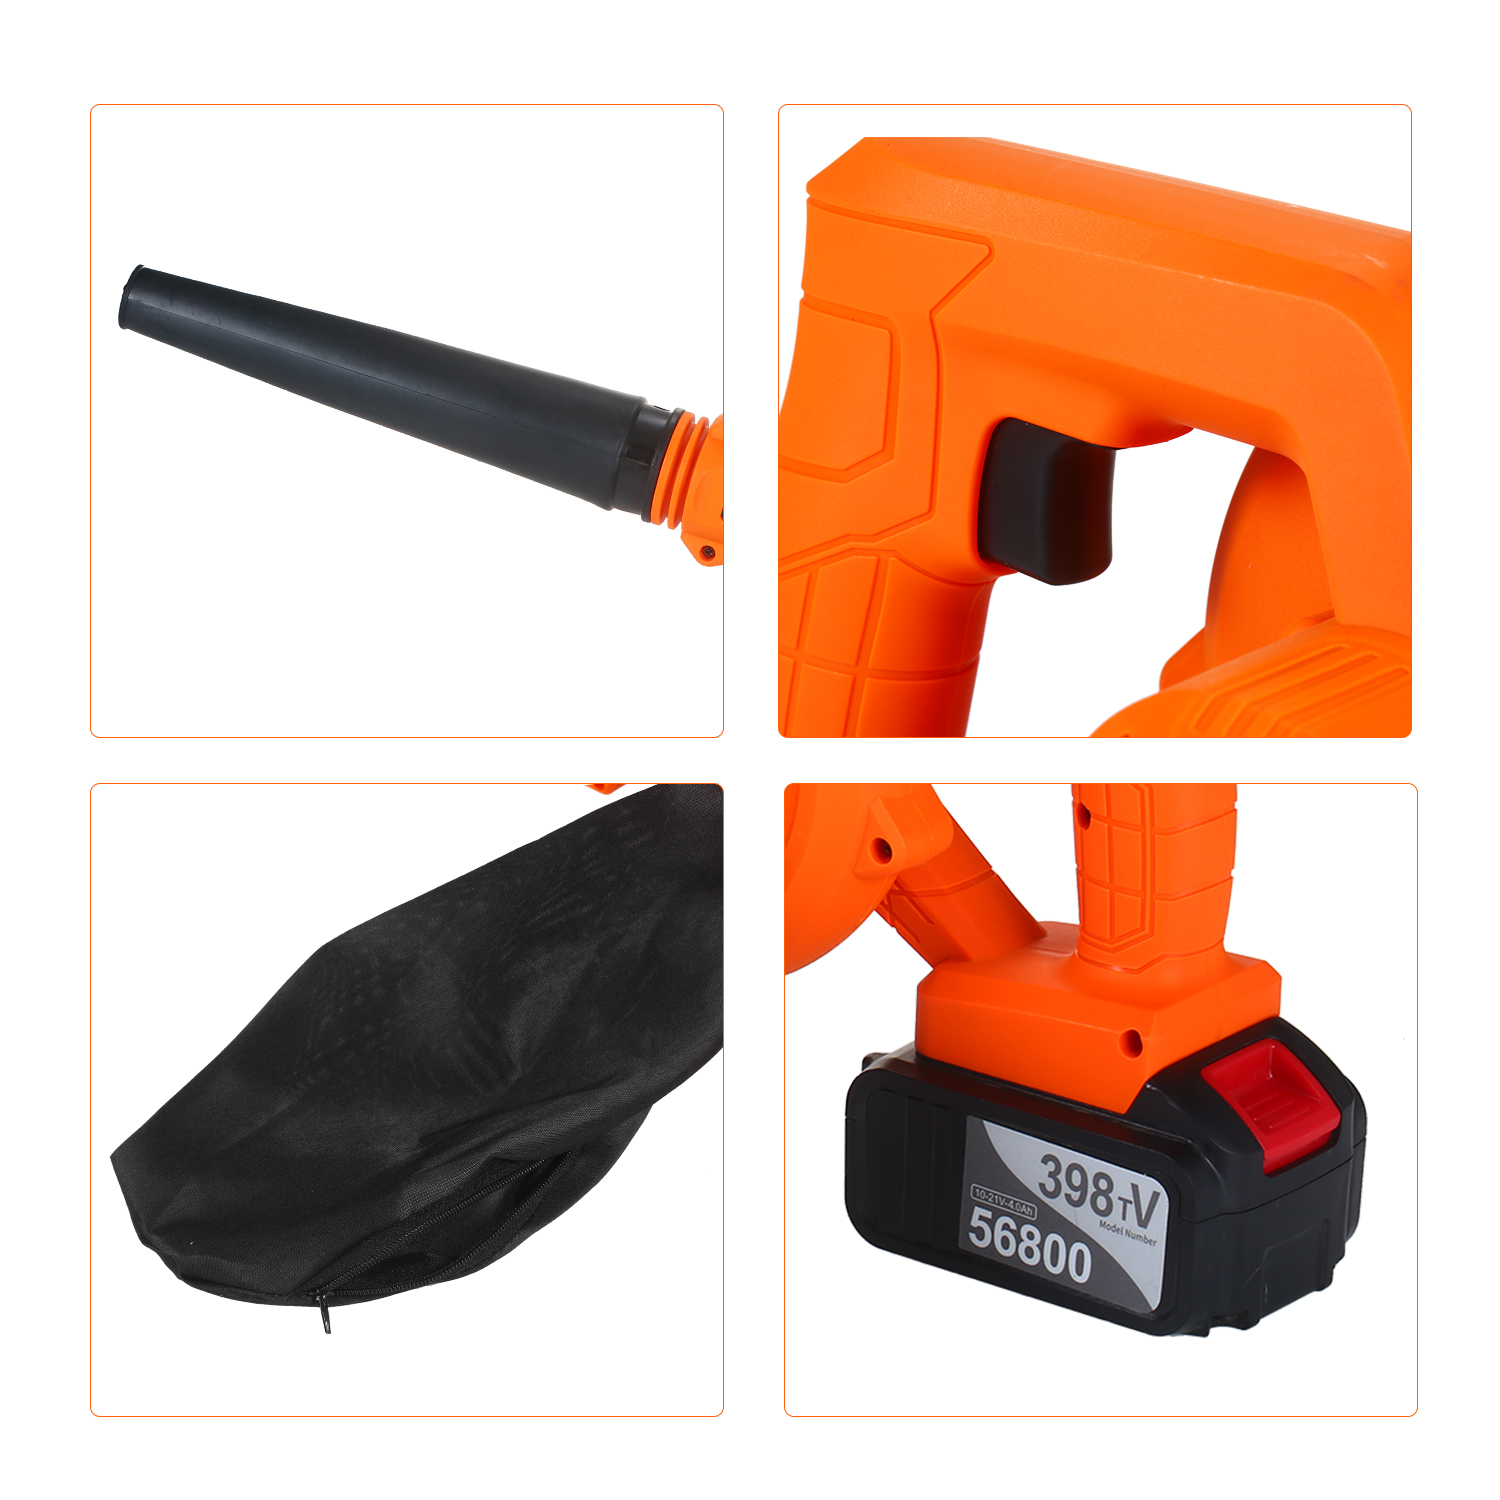 Cordless Leaf Blower Vacuum 21V 4.0 Ah Lithium Battery Powered Electric 2 in 1 Sweeper & Vacuum for Clearing Dust Leaf Snow